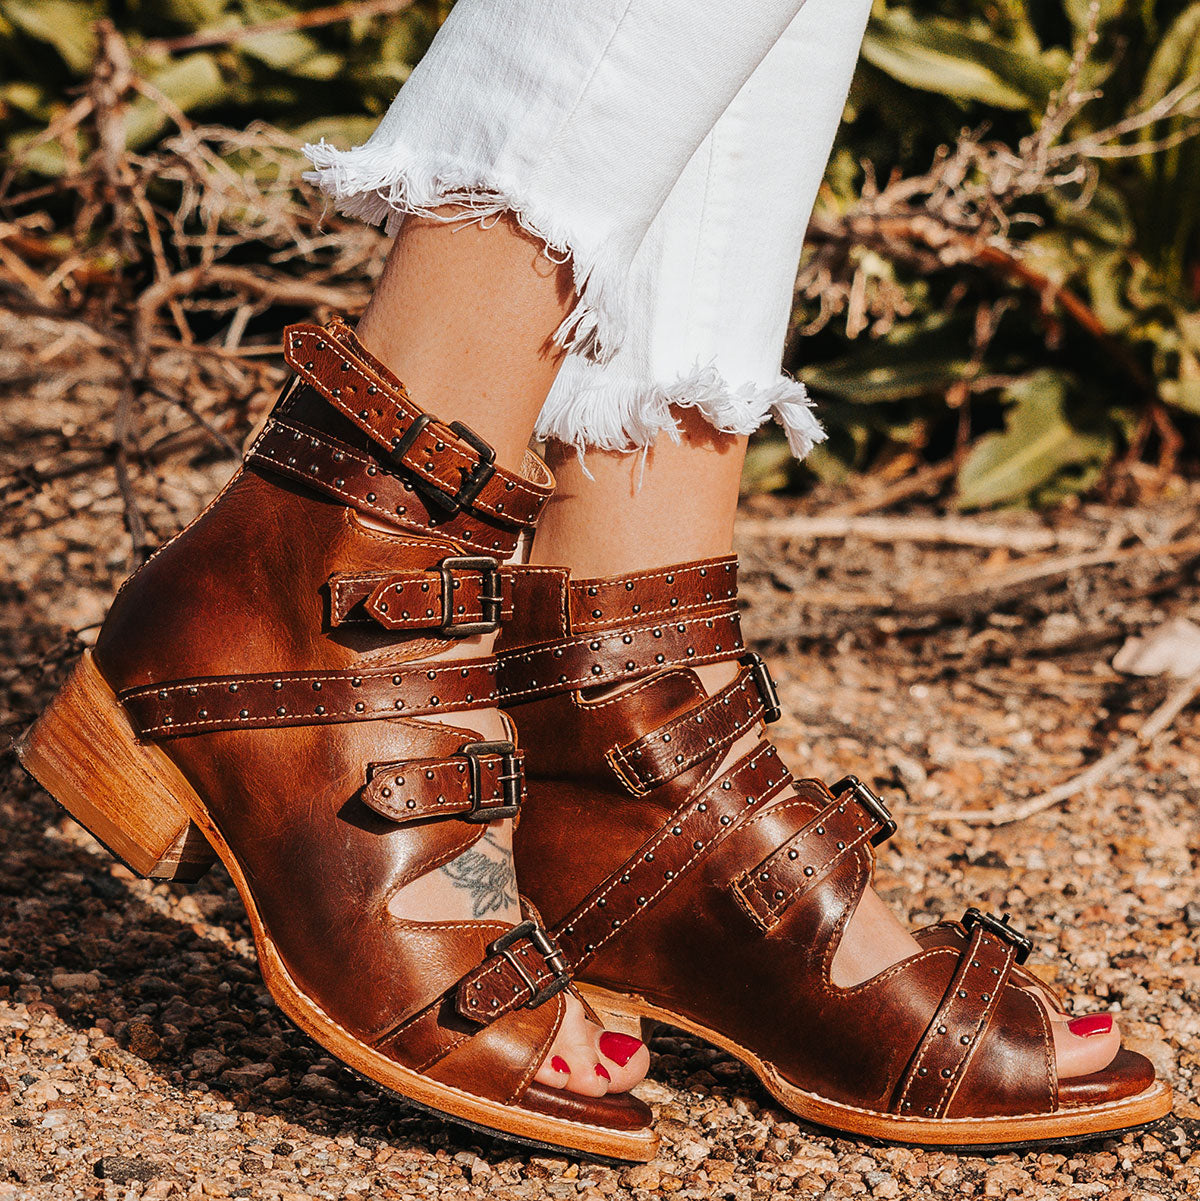 FREEBIRD women's Gunnar cognac leather sandal with adjustable leather straps, studded embellishments and a low block heel